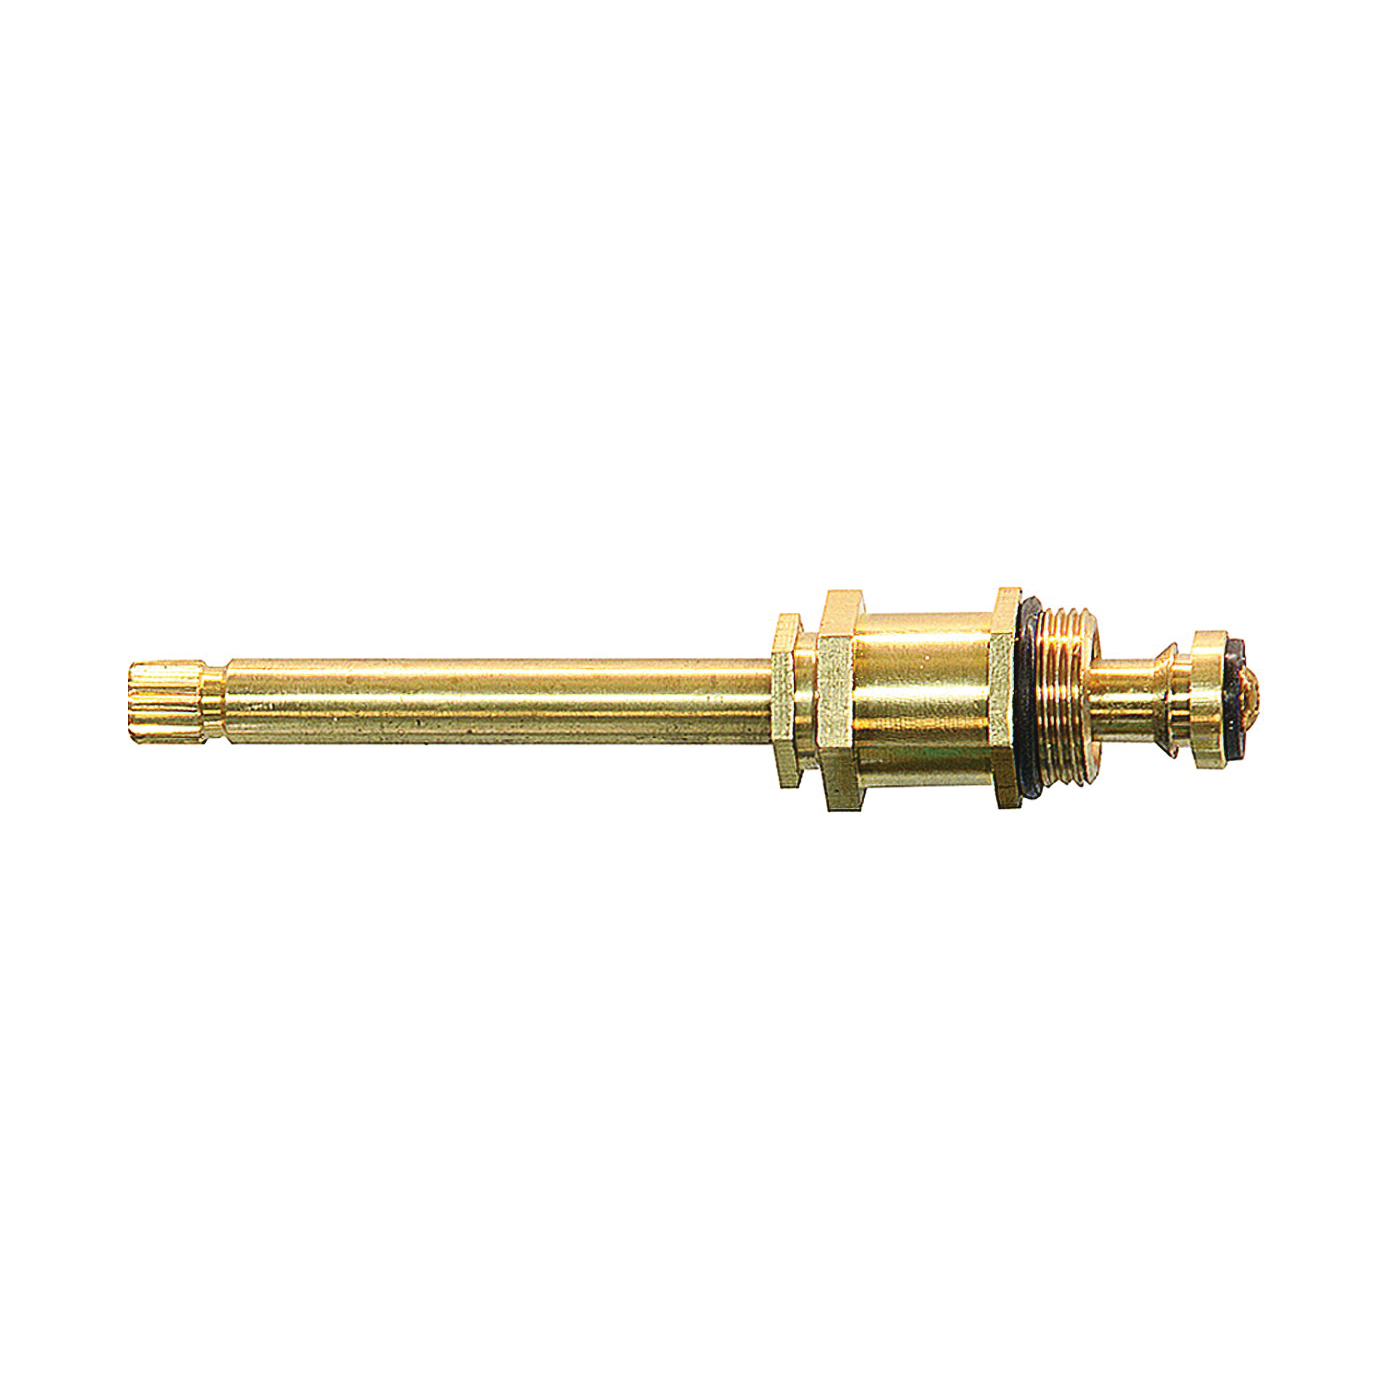 17093B Faucet Stem, Brass, 4-21/32 in L, For: Sayco Two Handle Models 308 and T-308 Bath Faucets